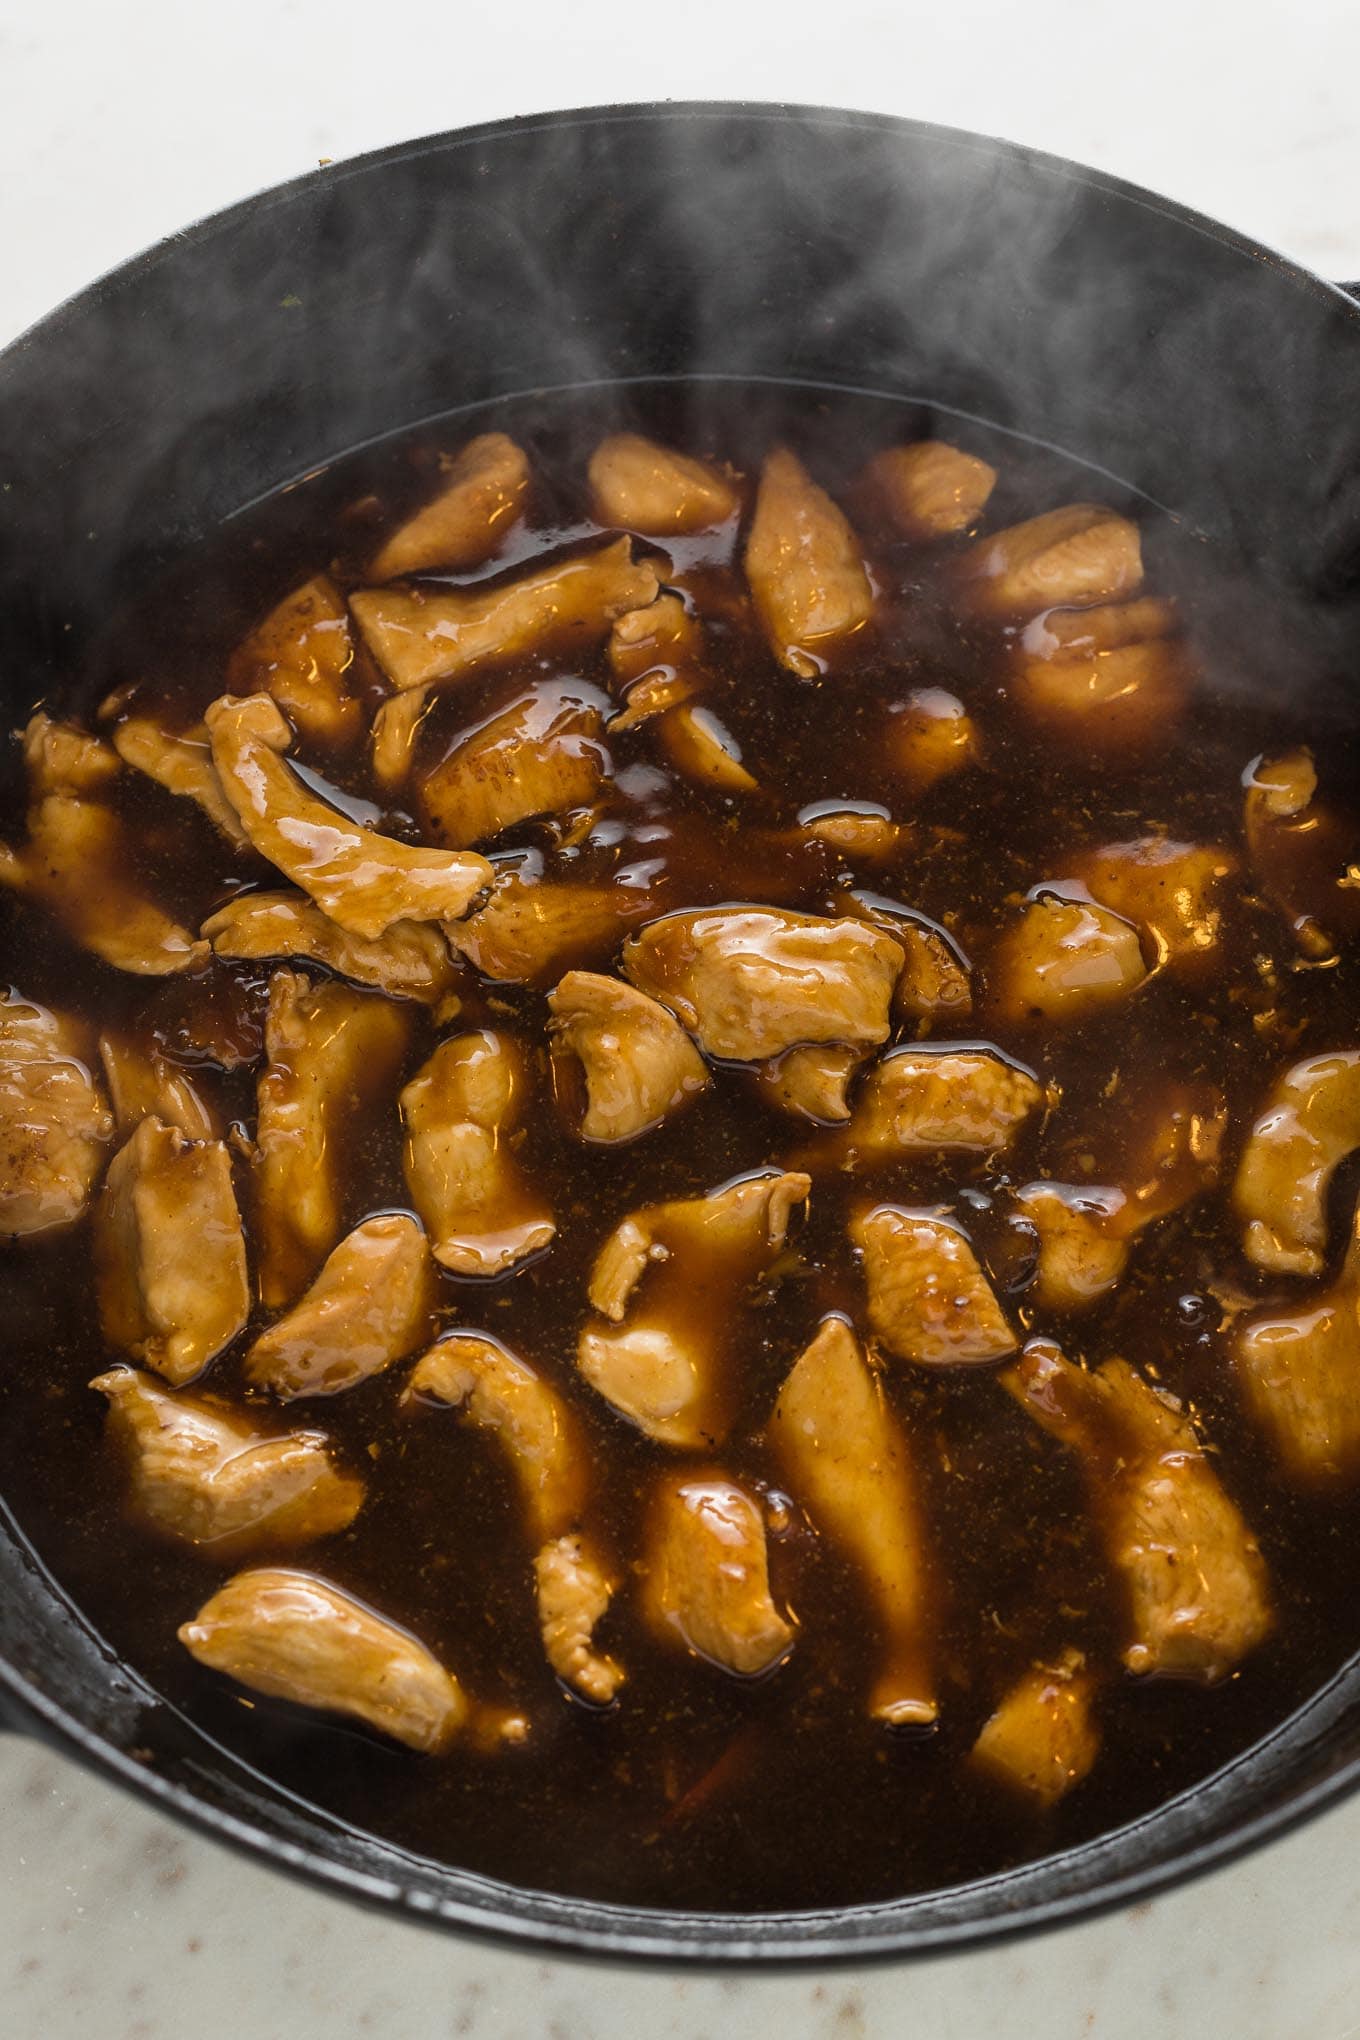 Stir fry sauce coating thinly-sliced chicken in a large skillet.